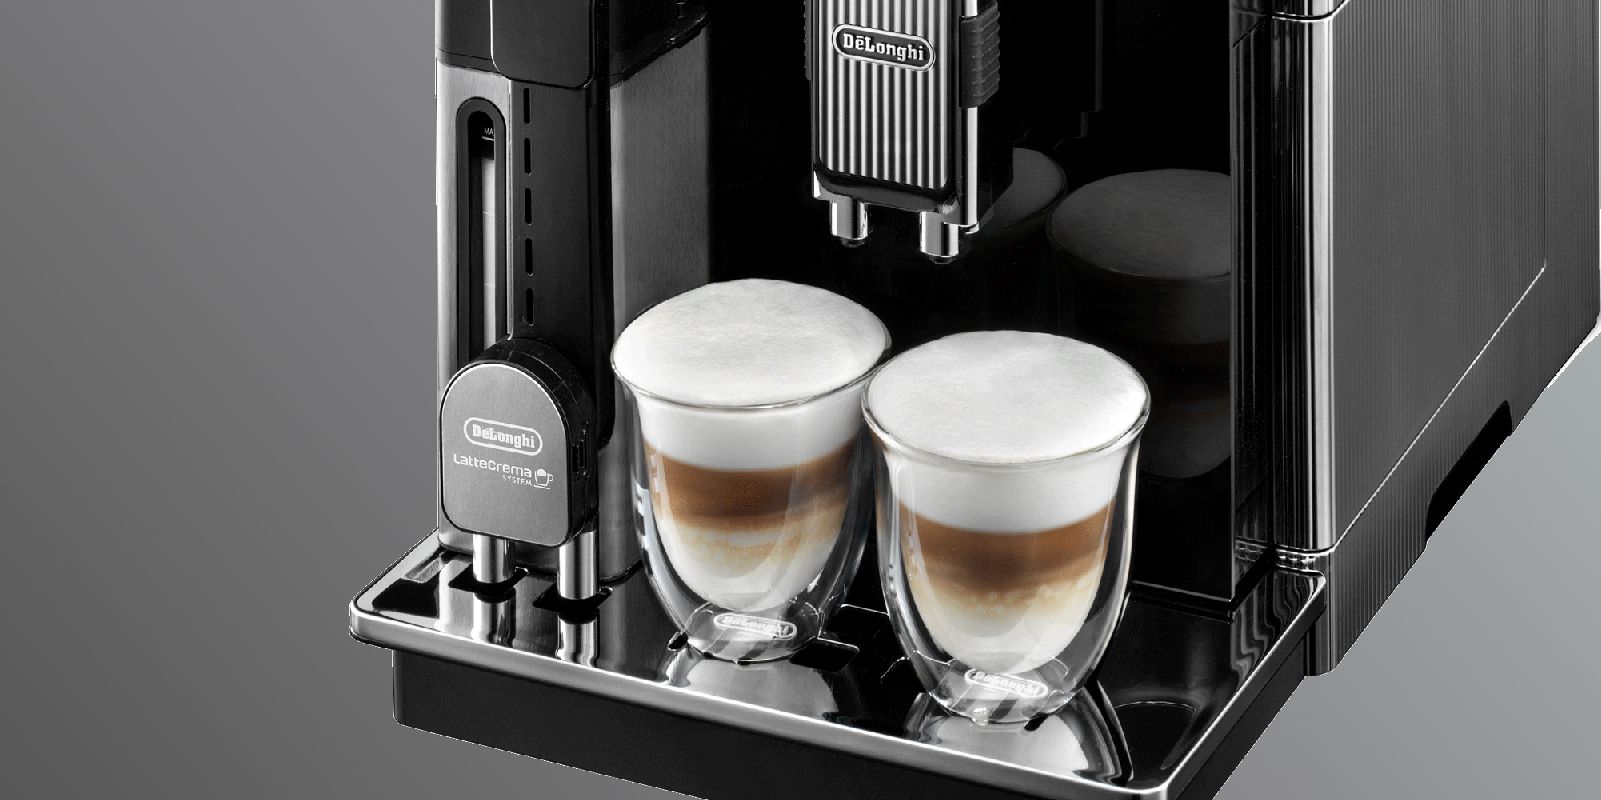 Fully automatic coffee machine brews two cappuccino